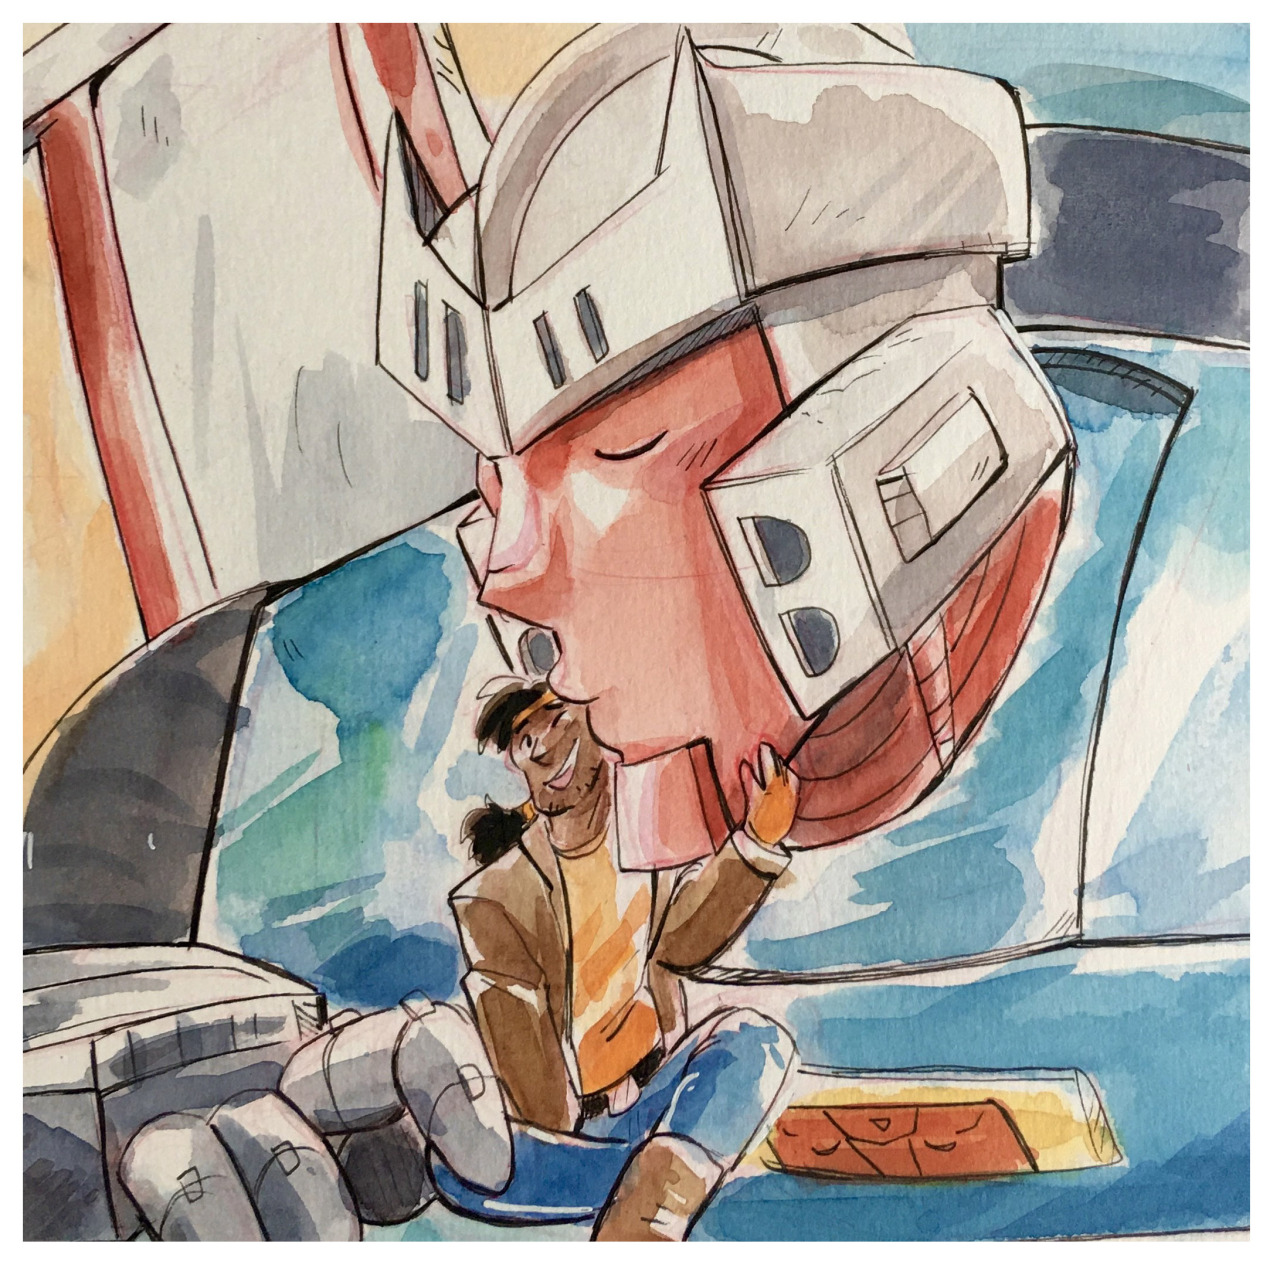 “Tracks... If you wanted a taste, you could’ve just asked ;]” 

“Raoul!!” #he didnt expect that much tongue  #once in a blue moon ill post some shit like this and get too embarrassed because i dont do this #g/t#tracksraoul#transformers #uhhh ask to tag #tracks#g1#maccadam#suggestive#my art #i read a fic once where they kissed and tracks got overeager and its fried my mind ever since  #delete later maybe god aa